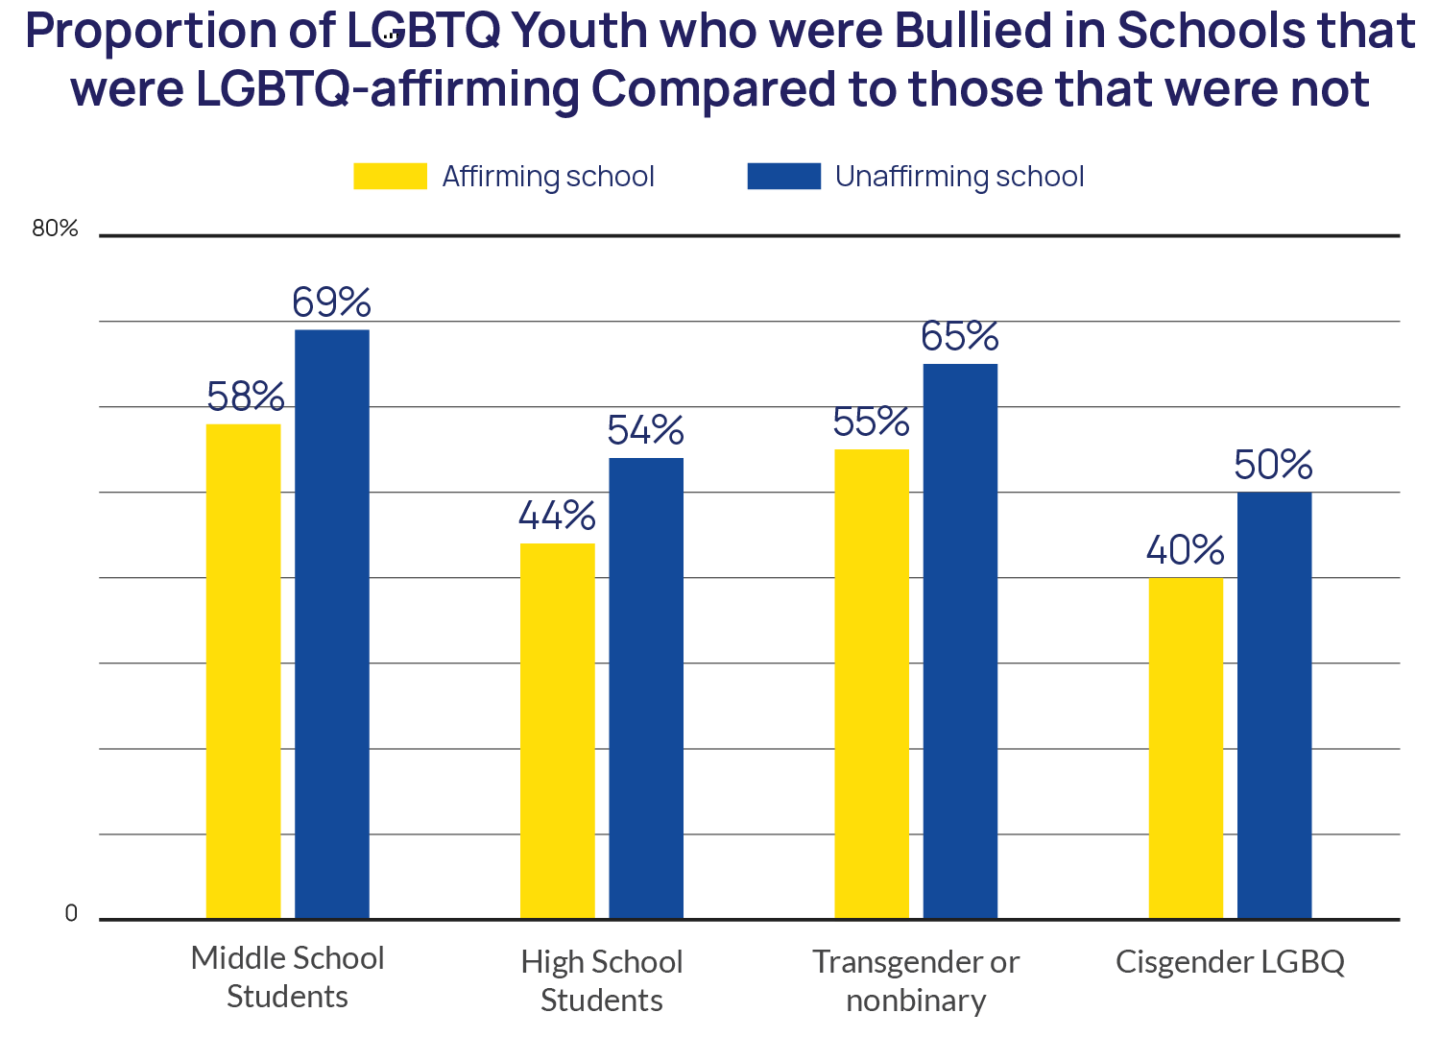 Proportion of LGBTQ Youth who were bullied in schools that were LGBTQ-affirming compared to those that were not.